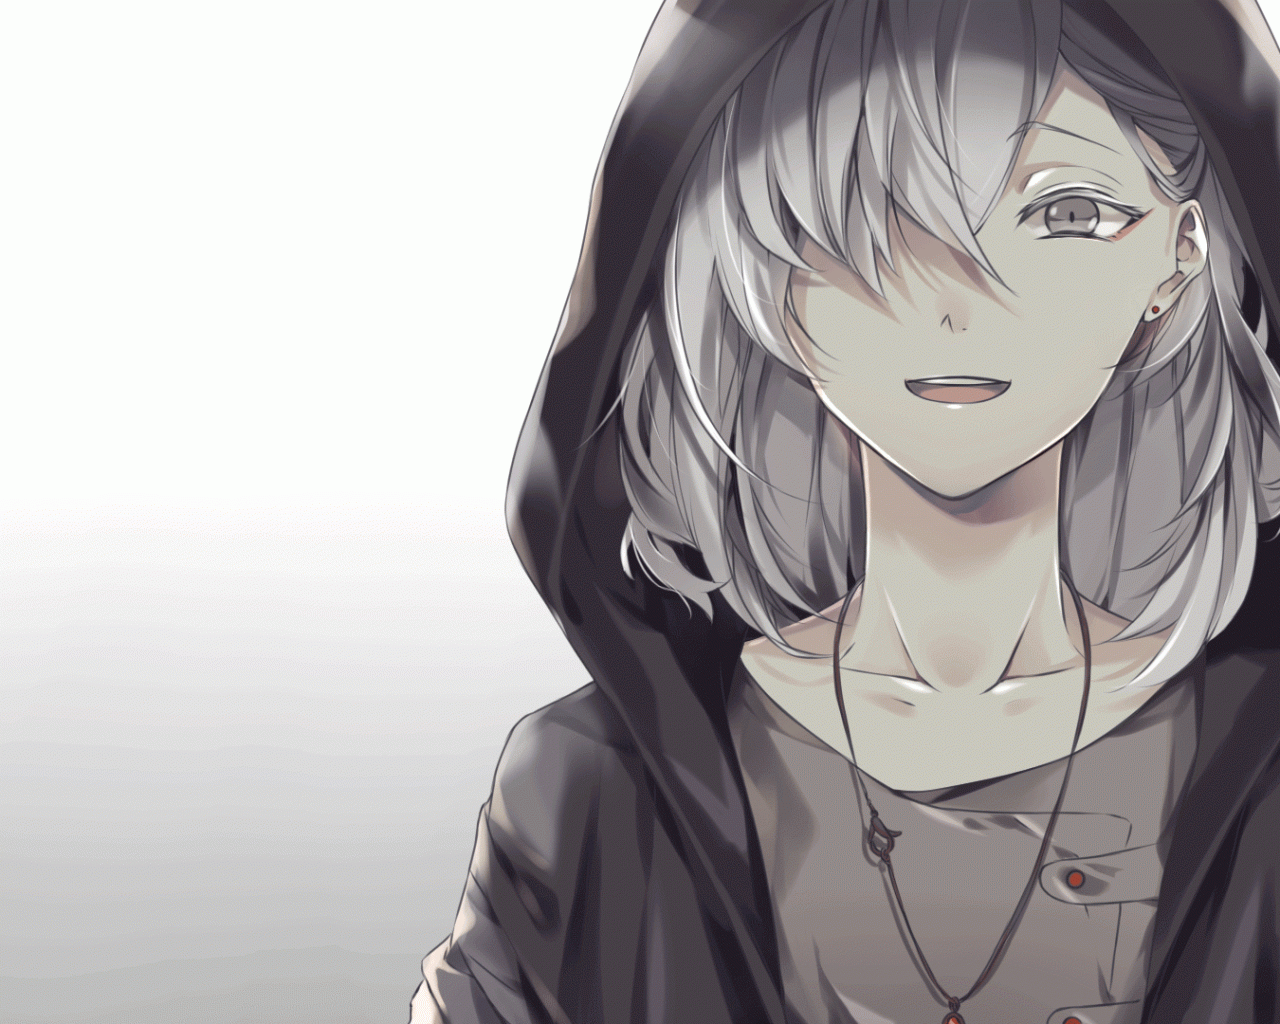 Download 1280x1024 Anime Boy, White Hair, Hoodie, Smiling, Necklace, Gray Eyes Wallpaper